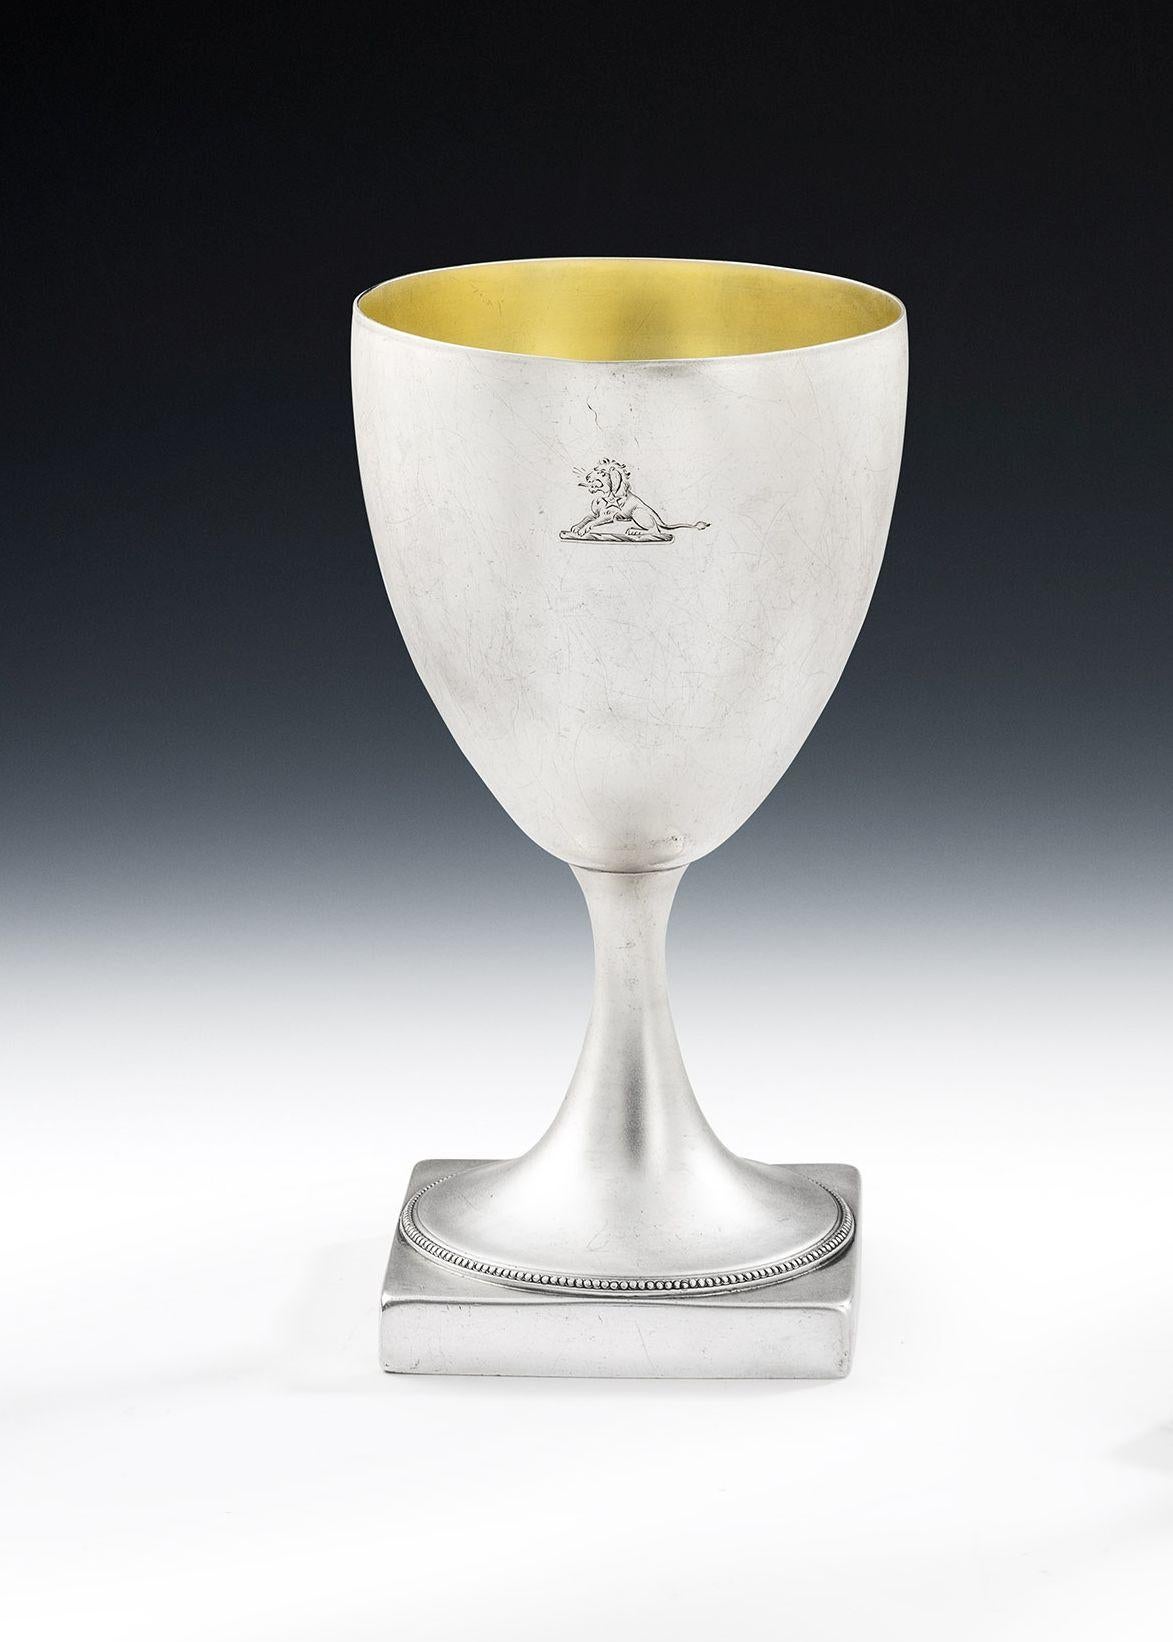 Hester Bateman. A Very Rare Pair of George III Wine Goblets Made in London in 1788 by Hester Bateman.

Each Goblet stands on a square pedestal foot decorated with a circular beaded band.  The Classical vase shaped main body is engraved with a